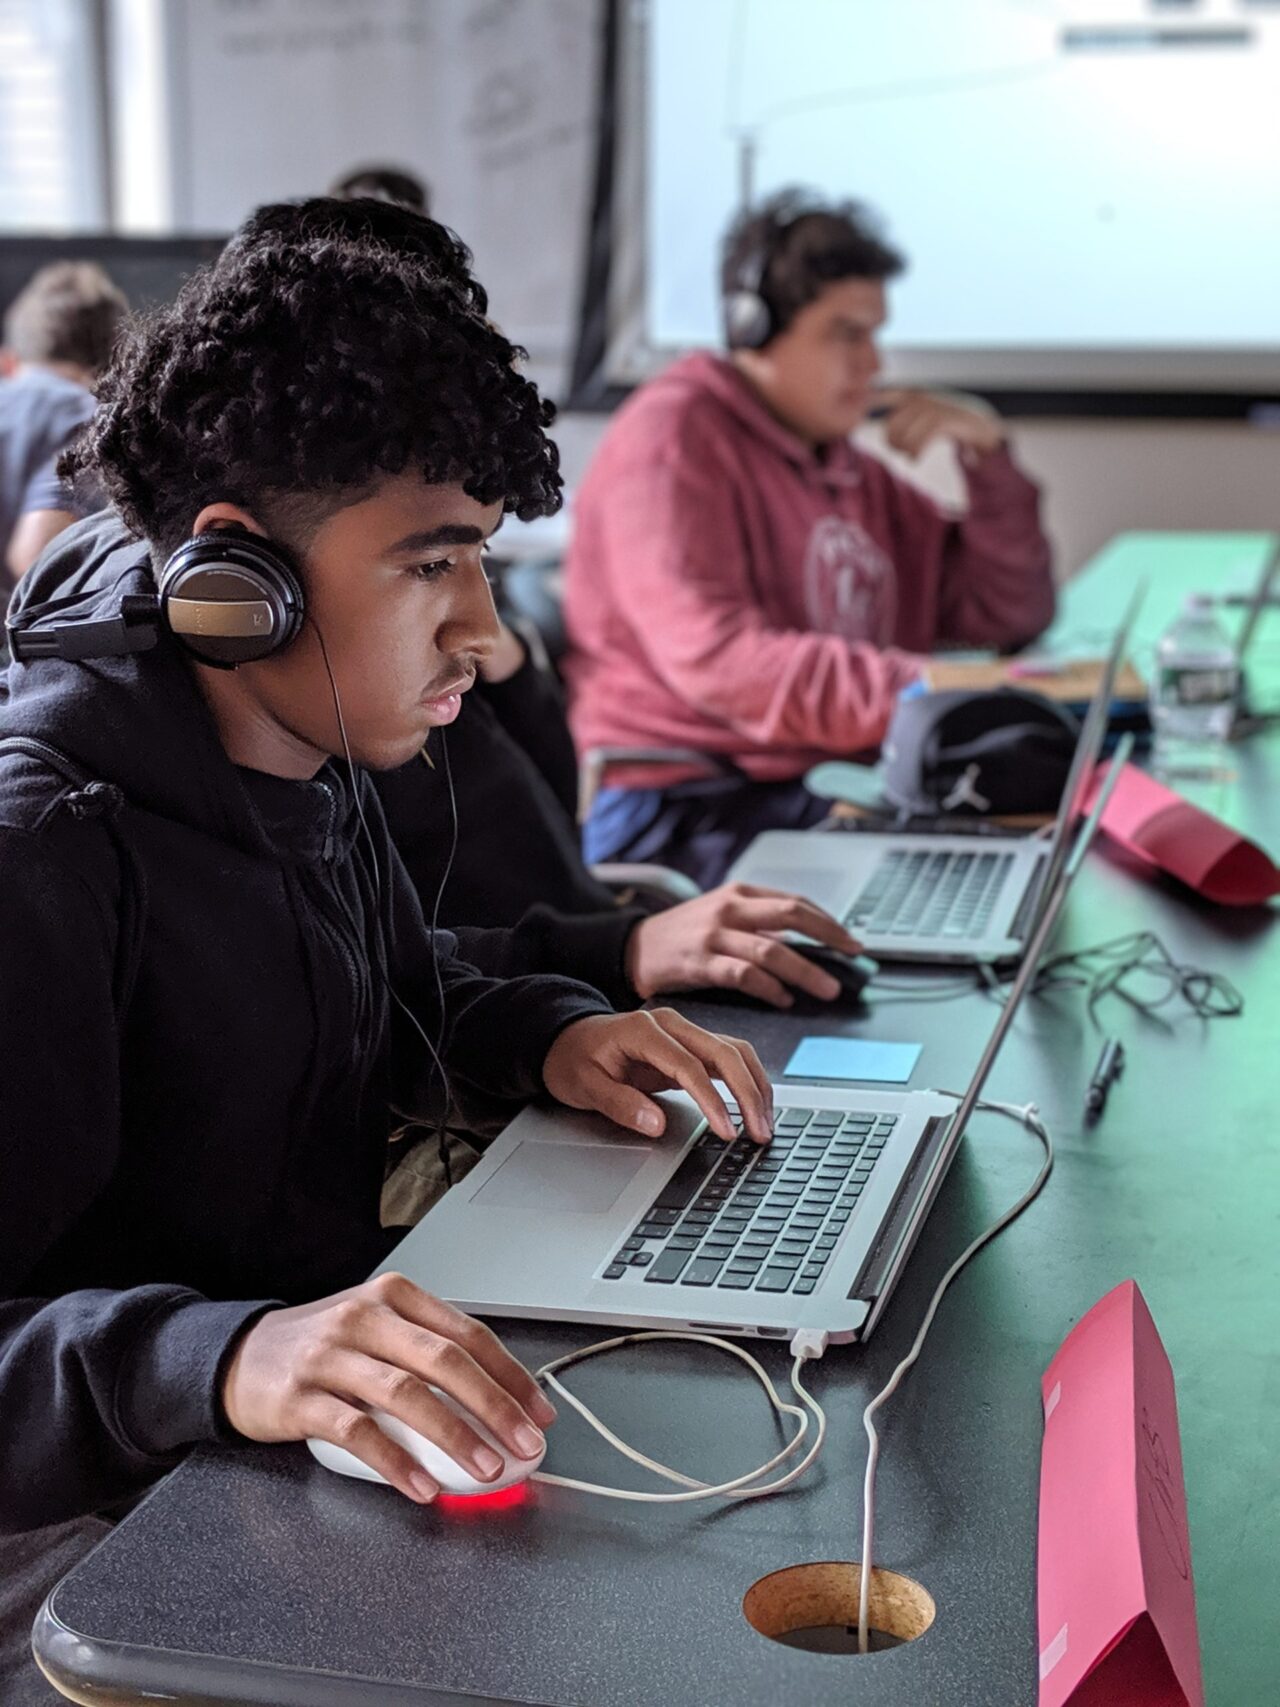 Three DDC 2019 Students working on tan apple laptop computer learning Max, in front of a white screen projector. They focus on their screens in front of them with over the ear headphones on, following the lesson.